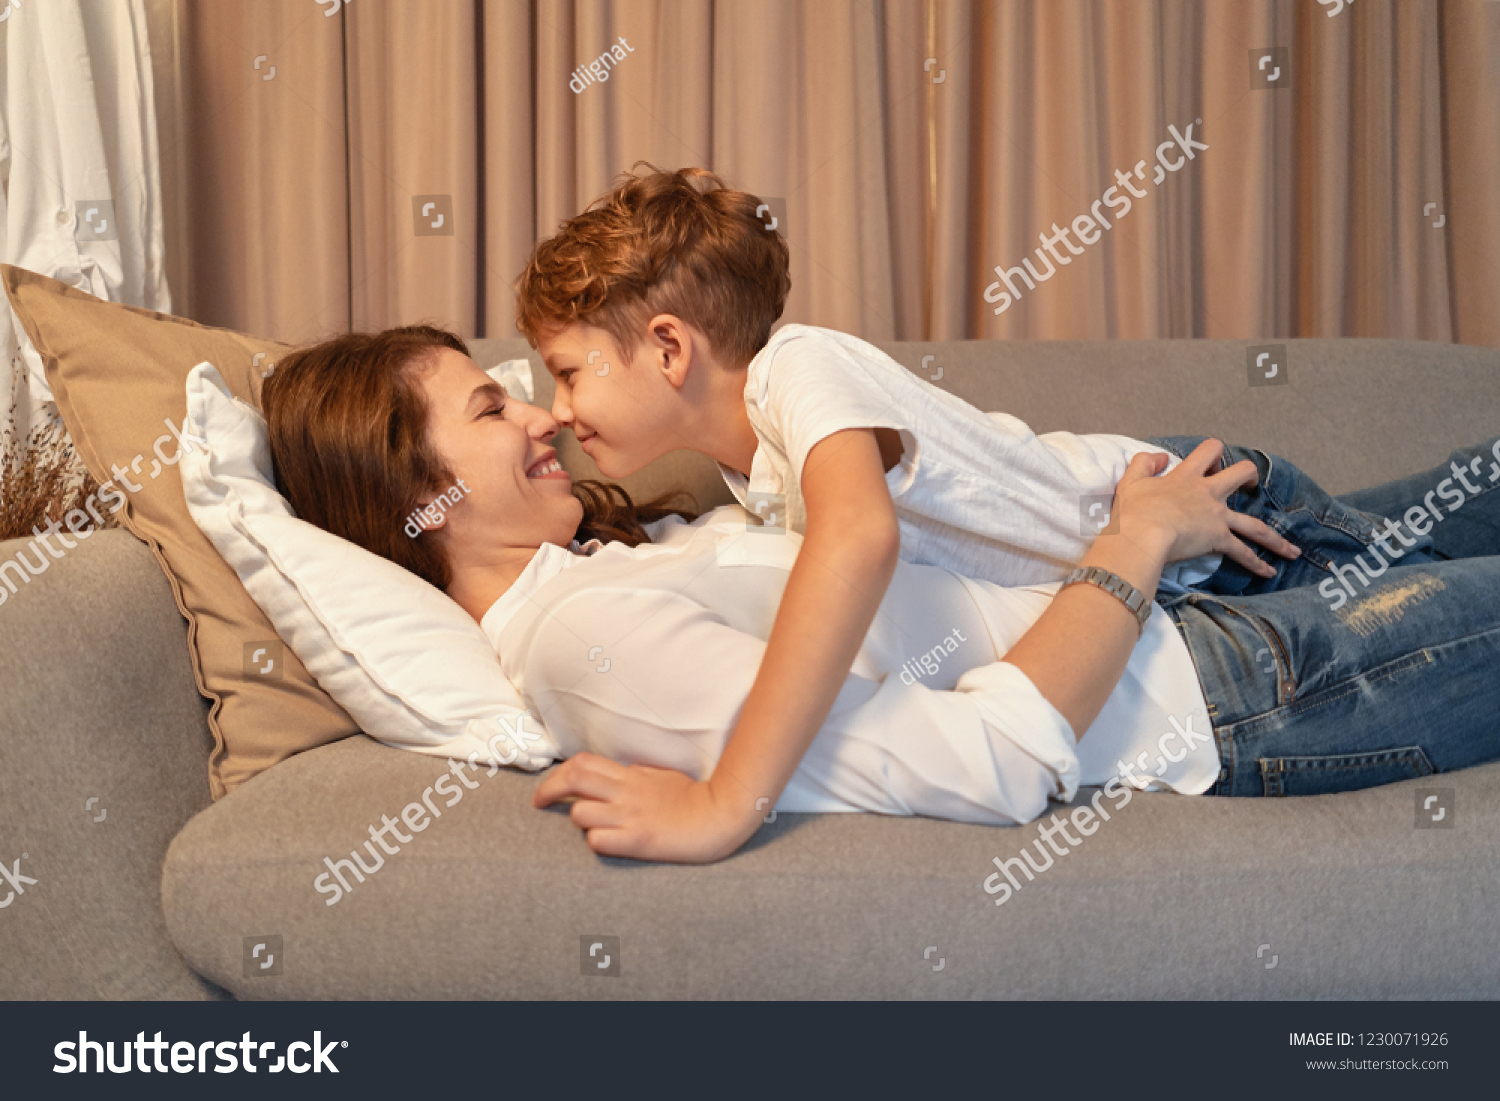 Best of Mom son making love